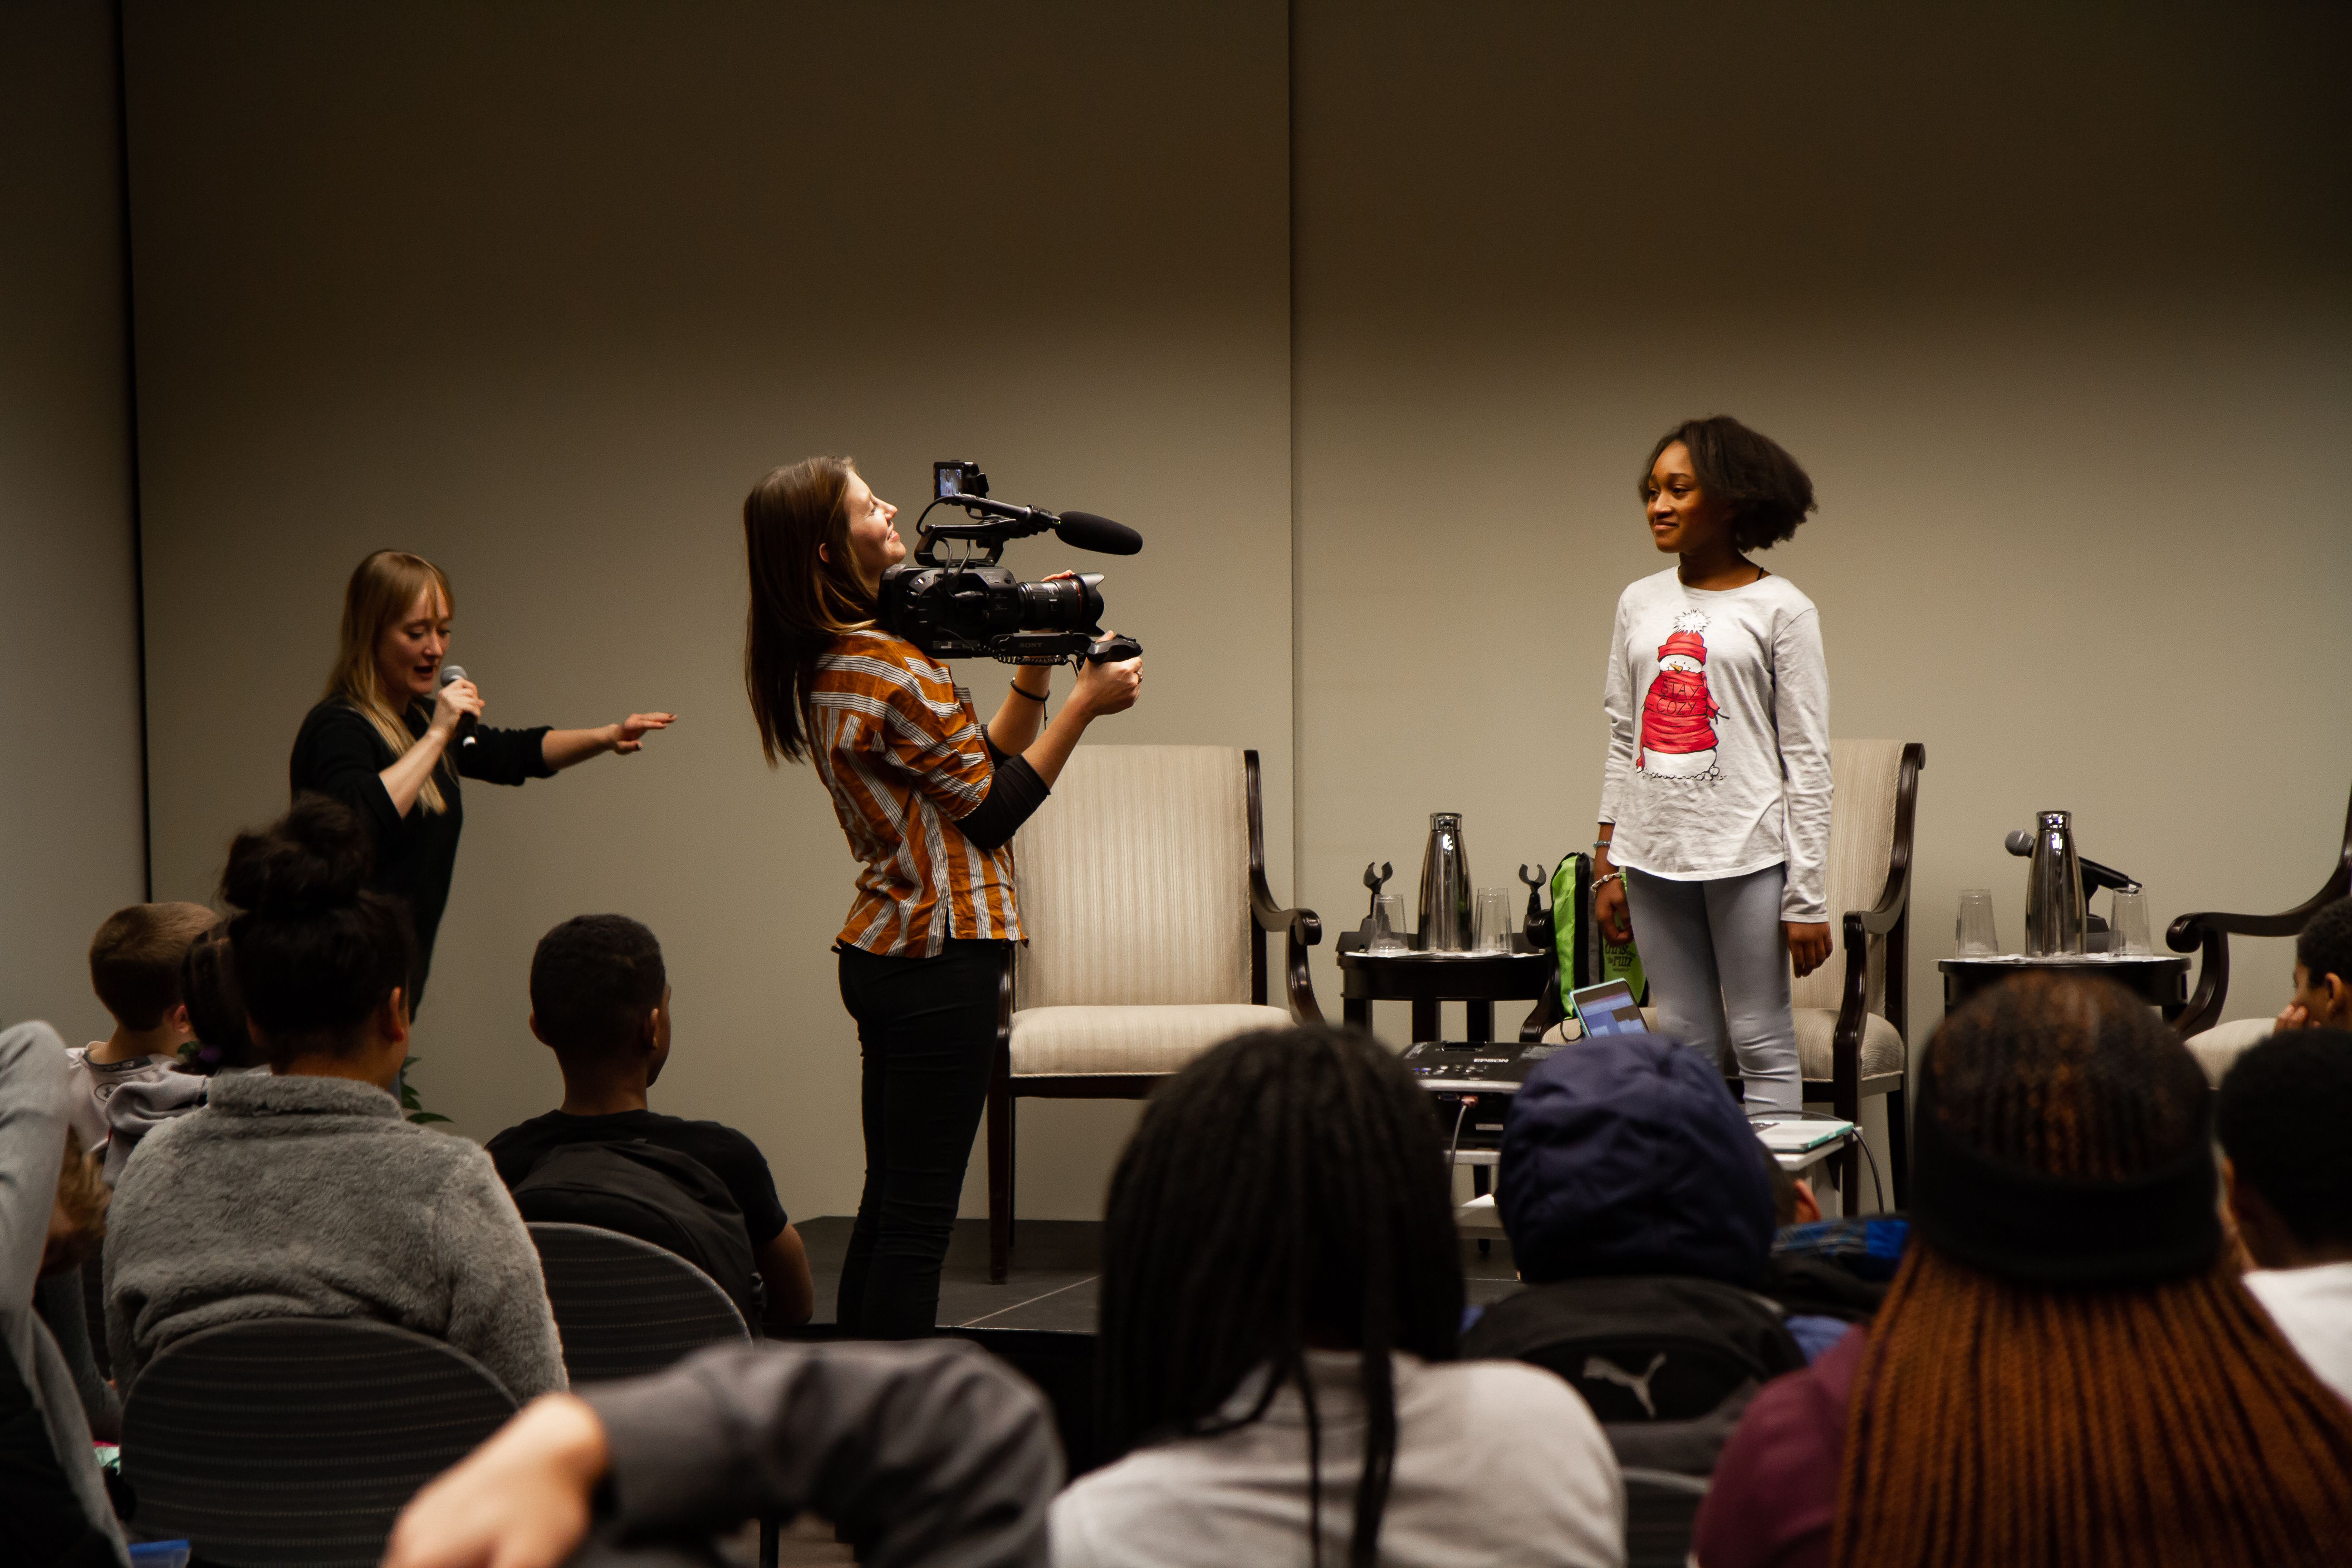 A volunteer student helps the filmmakers demonstrate a scene breakdown. Image by Claire Seaton. Washington, D.C., 2018.